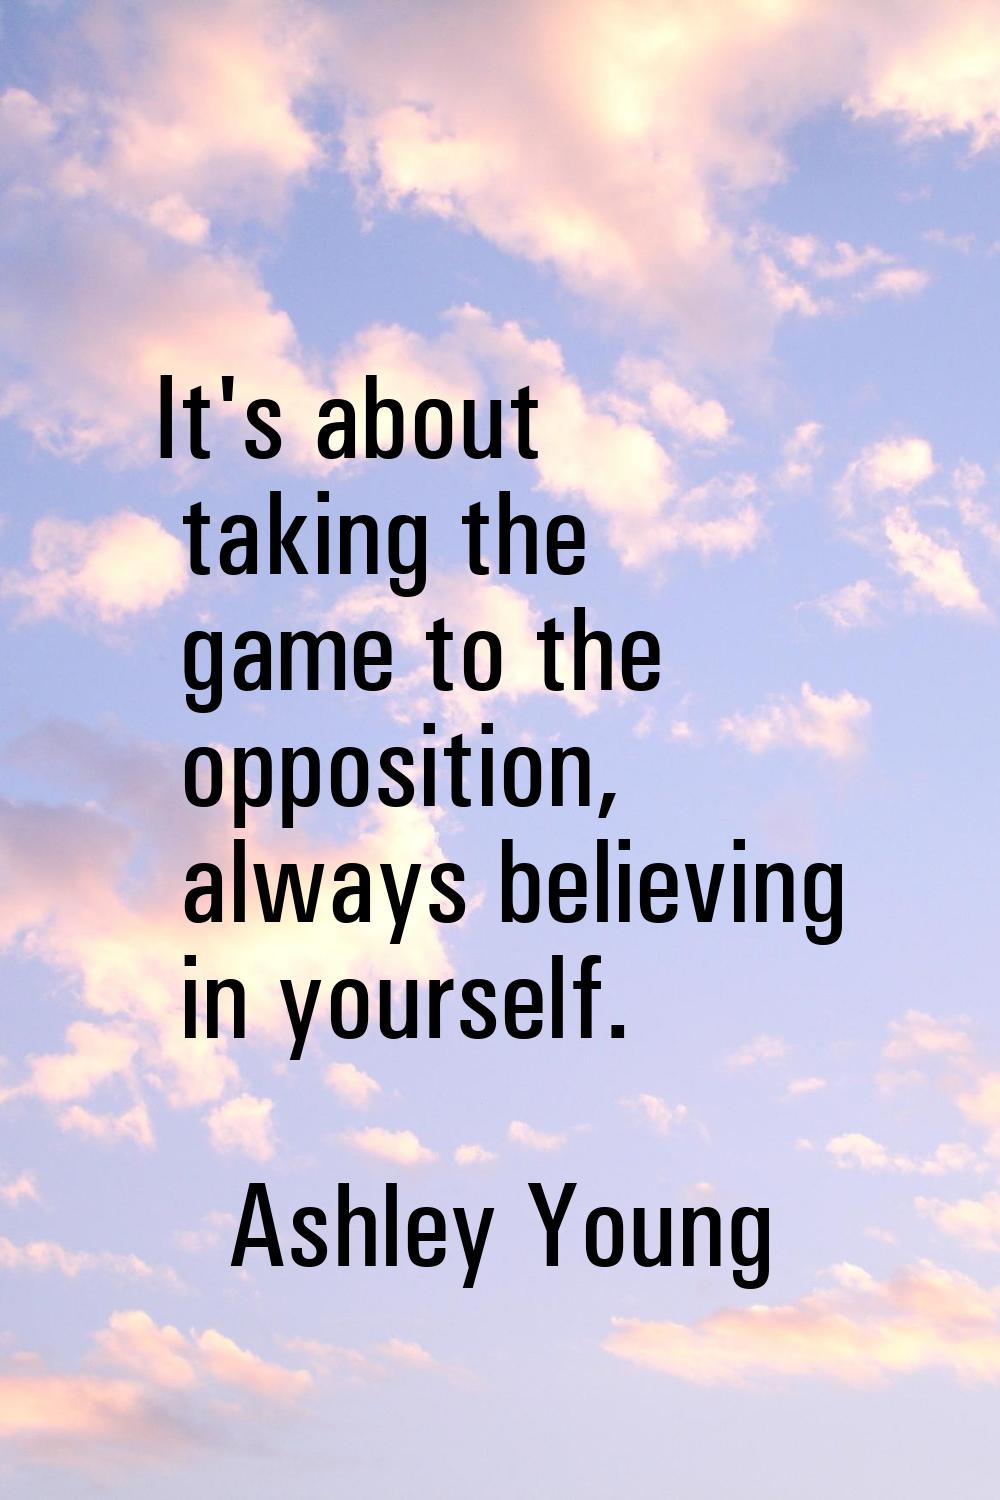 It's about taking the game to the opposition, always believing in yourself.